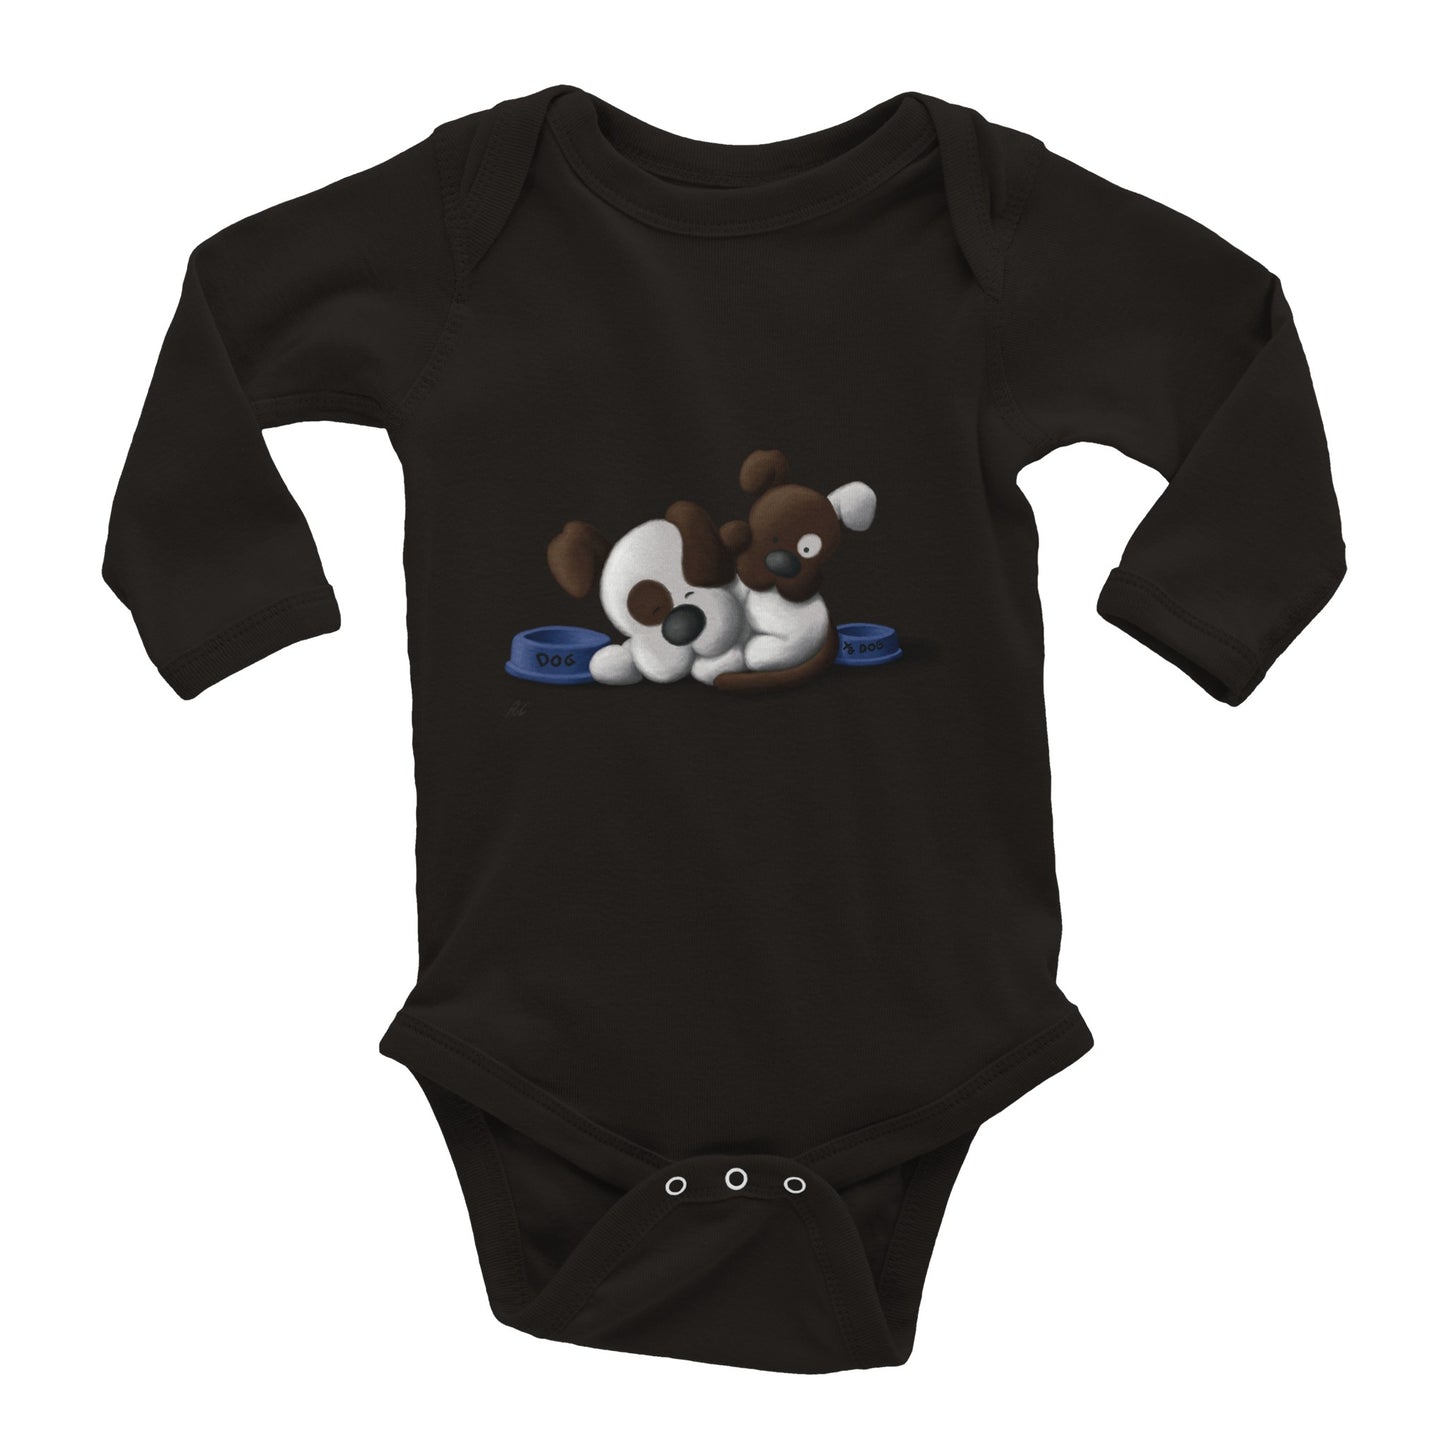 "Wake up Dad, it's time for Dinner!" - Classic Baby Long Sleeve Bodysuit